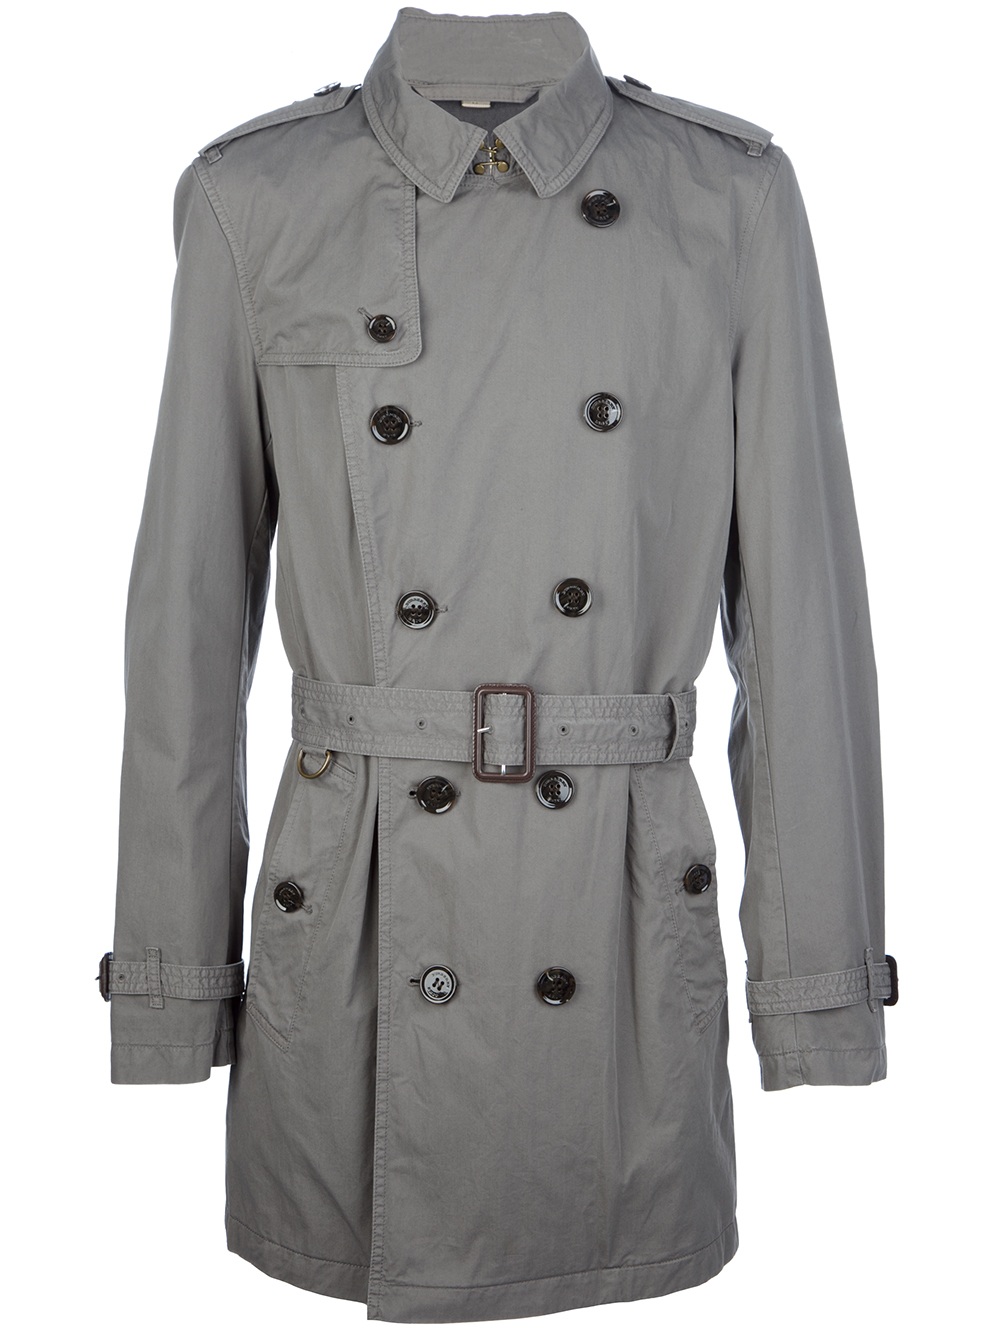 Lyst - Burberry Brit Britton Trench Coat in Gray for Men